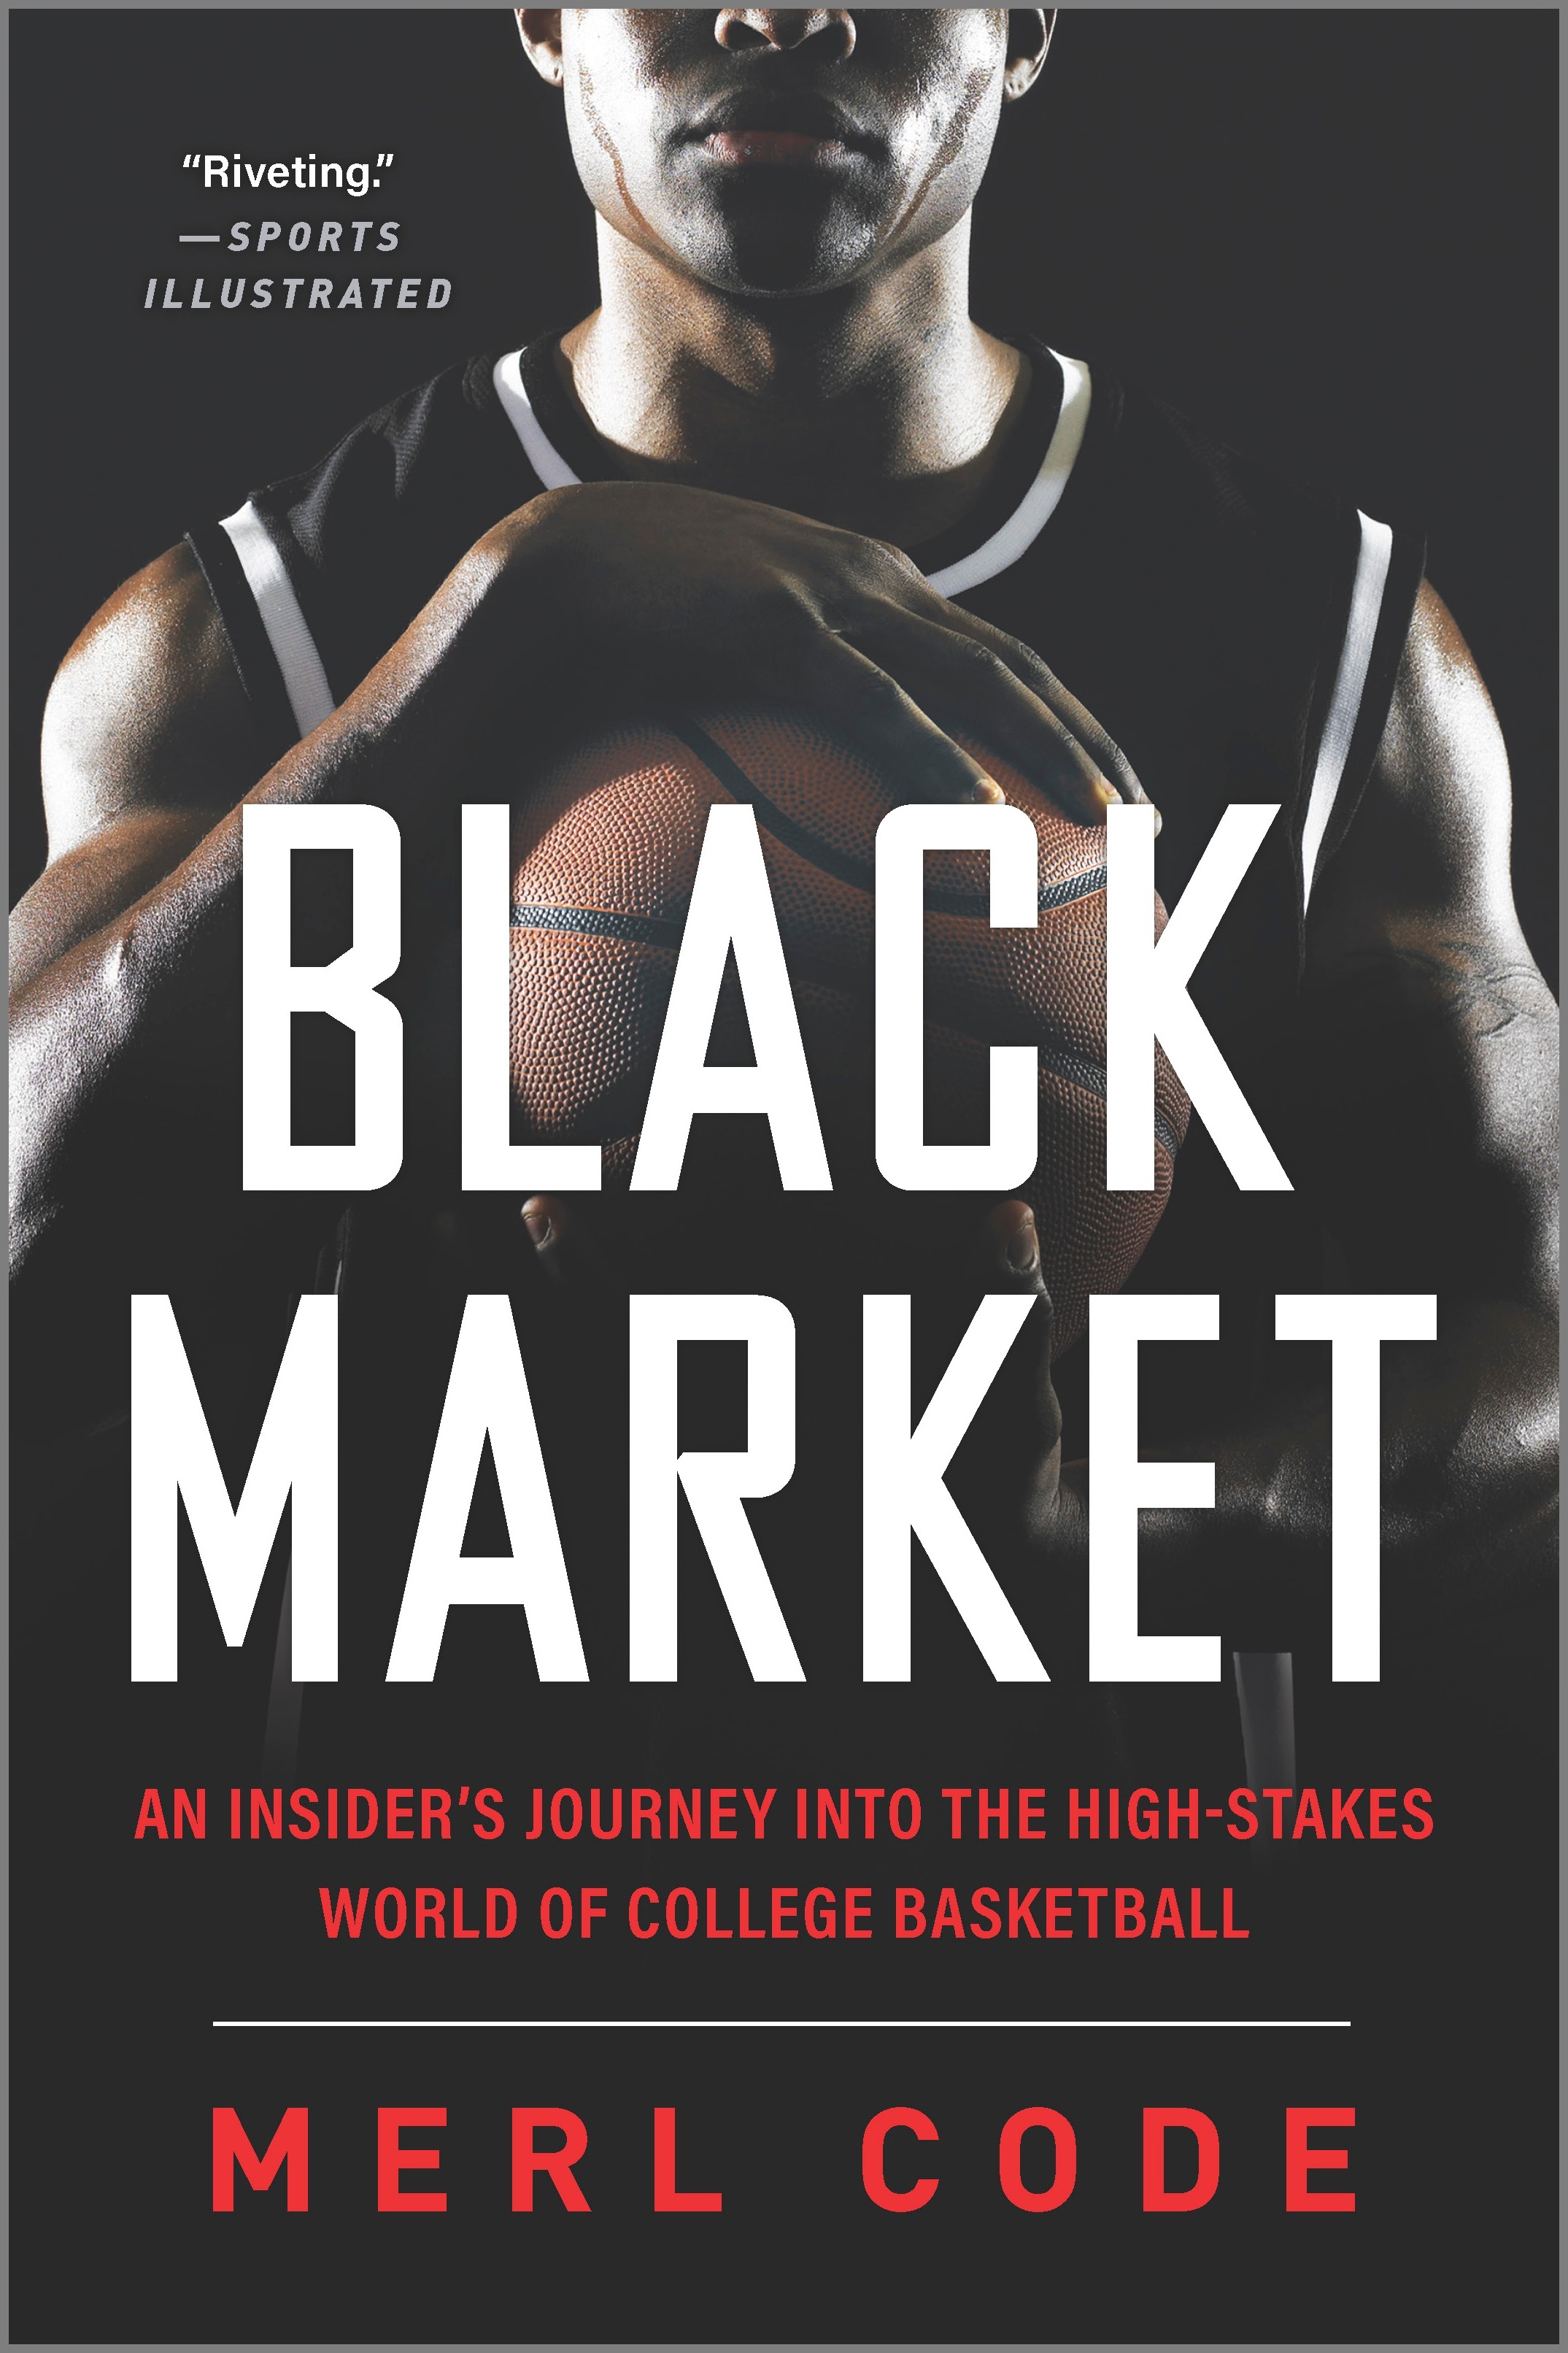 Black Market : An Insider's Journey into the High-Stakes World of College Basketball | Biography & Memoir